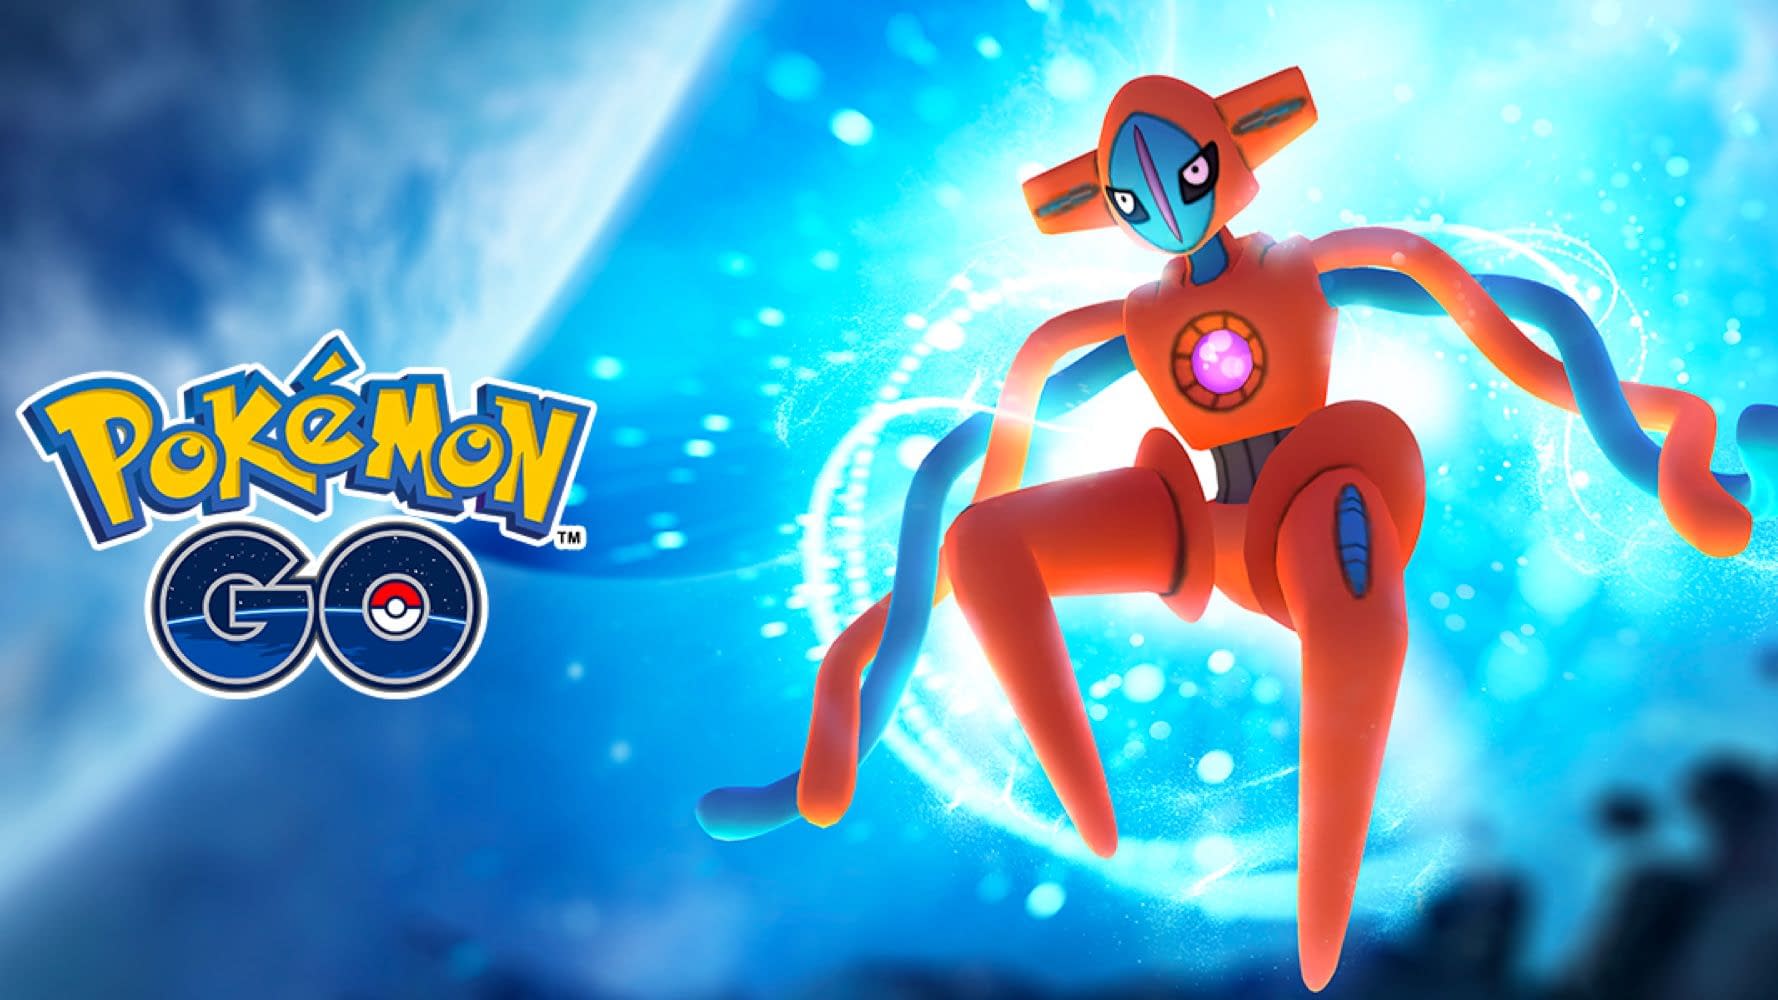 Deoxys Raid Guide How To Catch A Shiny Deoxys In Pokemon Go - roblox pokemon battle brawlers how to get rayquaza